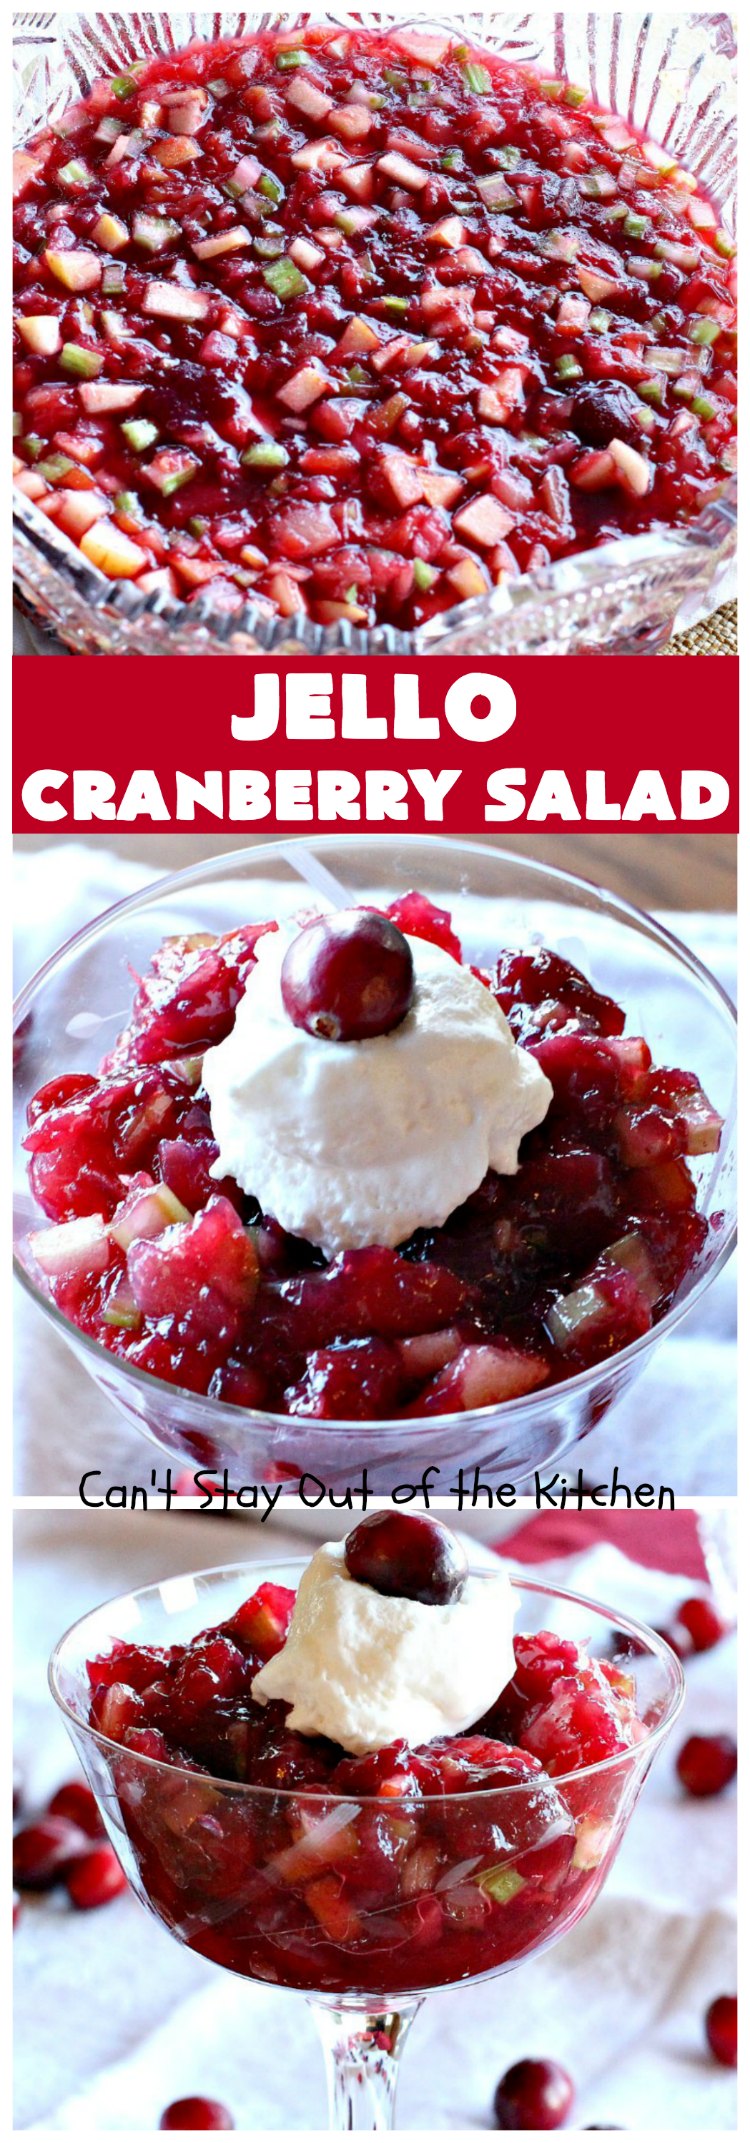 Jello Cranberry Salad | Can't Stay Out of the Kitchen | this #CongealedSalad is delightful for the #holidays. It's prepared a day in advance which is really helpful. It's made with either fresh #cranberries & sugar or #WholeBerryCranberrySauce. It also has diced #celery, #apples & #pineapple. This terrific #salad is great for #Thanksgiving or  #Christmas dinner. #GlutenFree #Jello #HolidaySideDish #JelloCranberrySalad